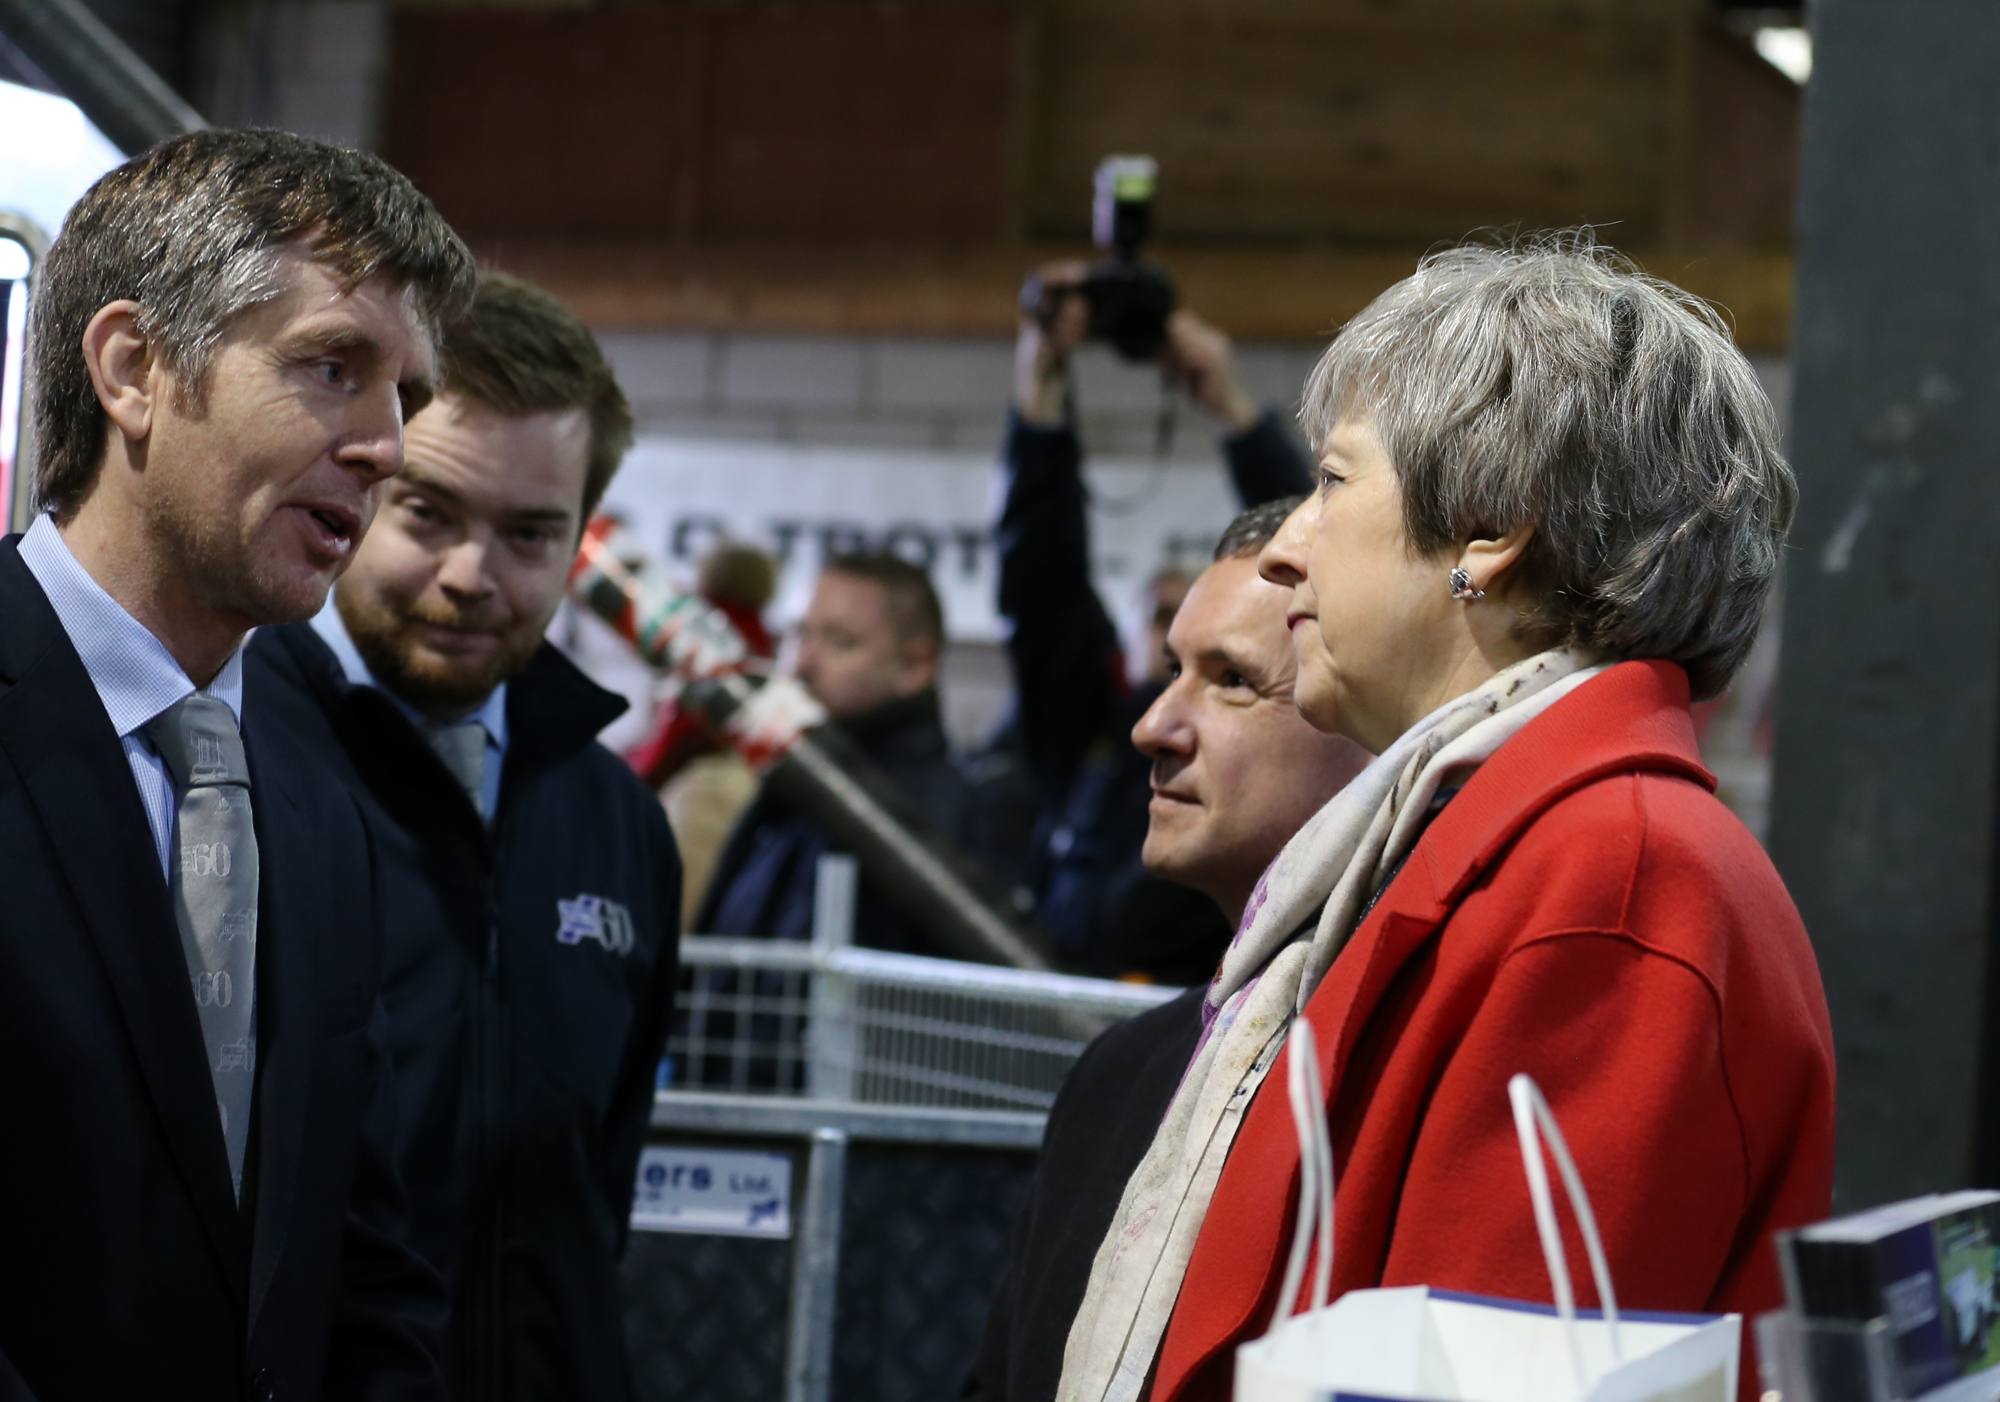 Prime Minister seeks views of trailer firm boss about Brexit